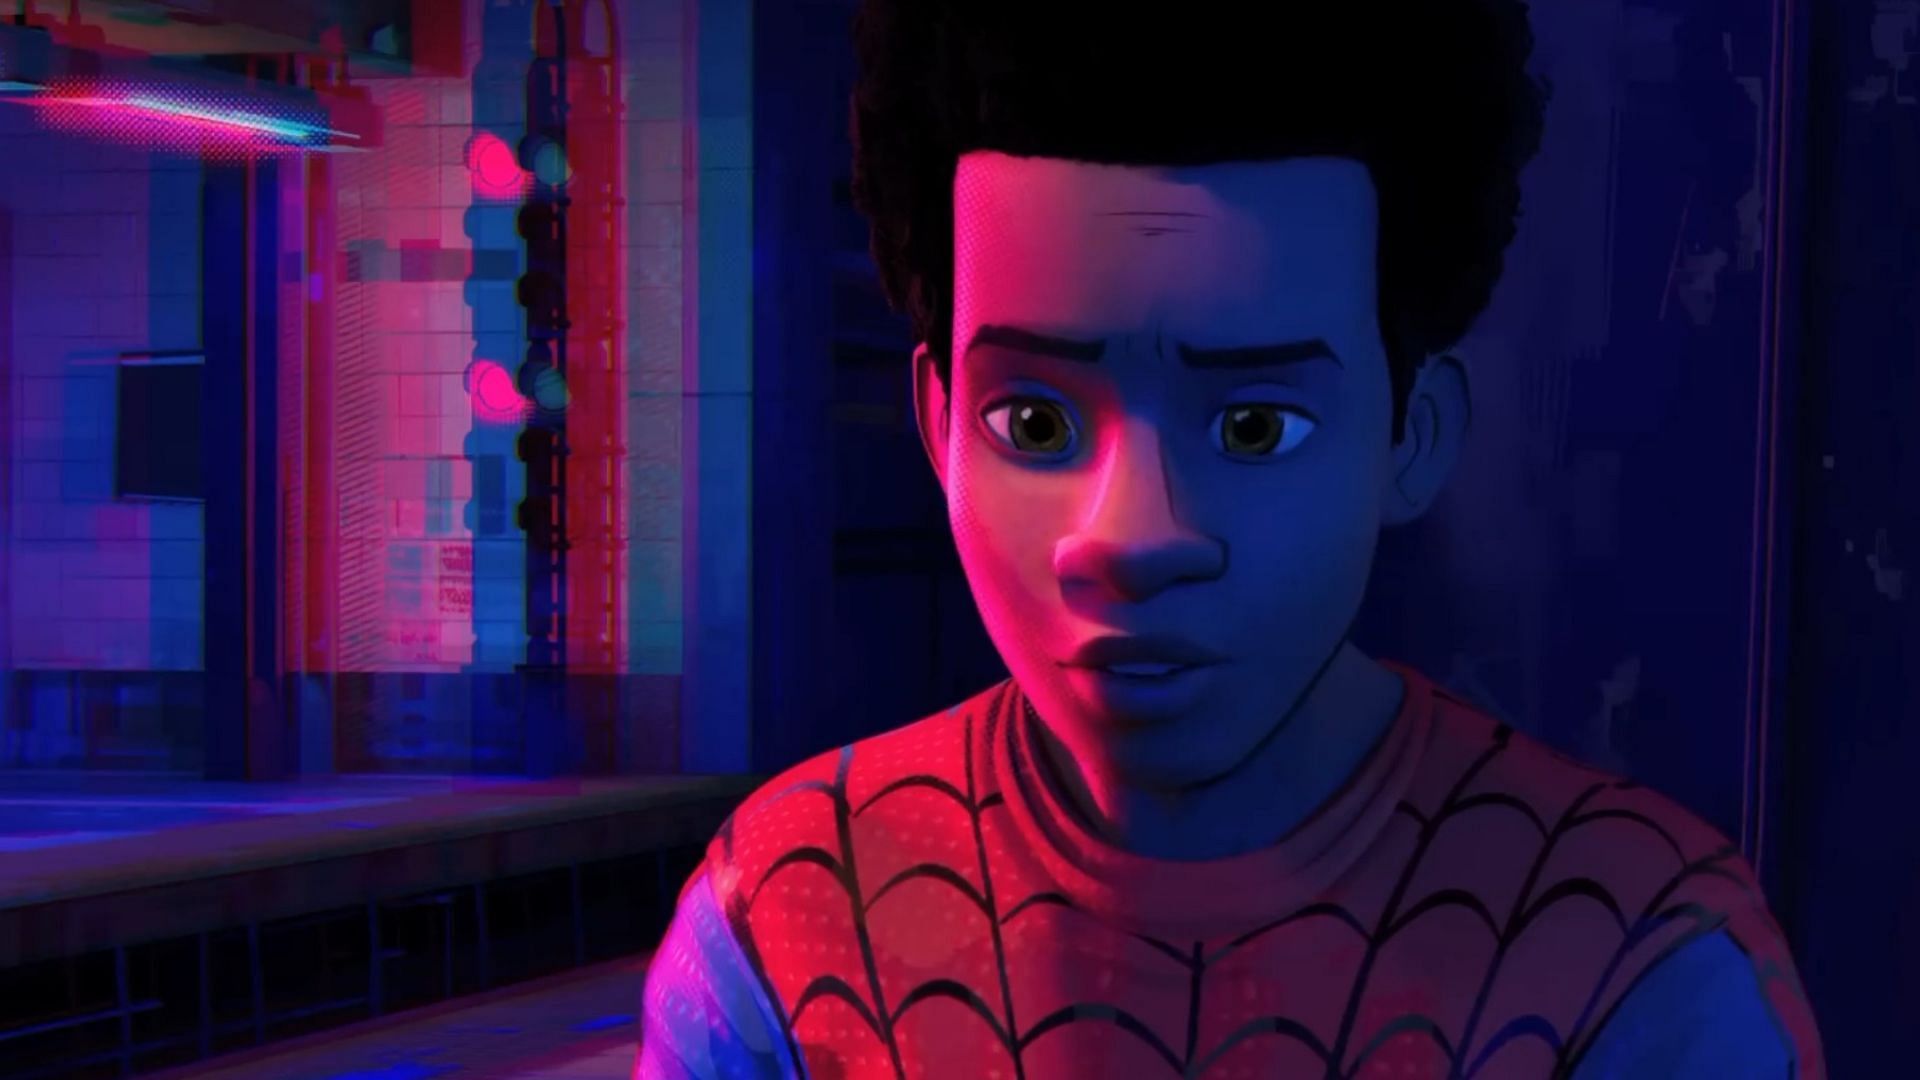 Miles Morales as seen in the first film Spider-Man: Into the Spider-Verse (Image via Sony)